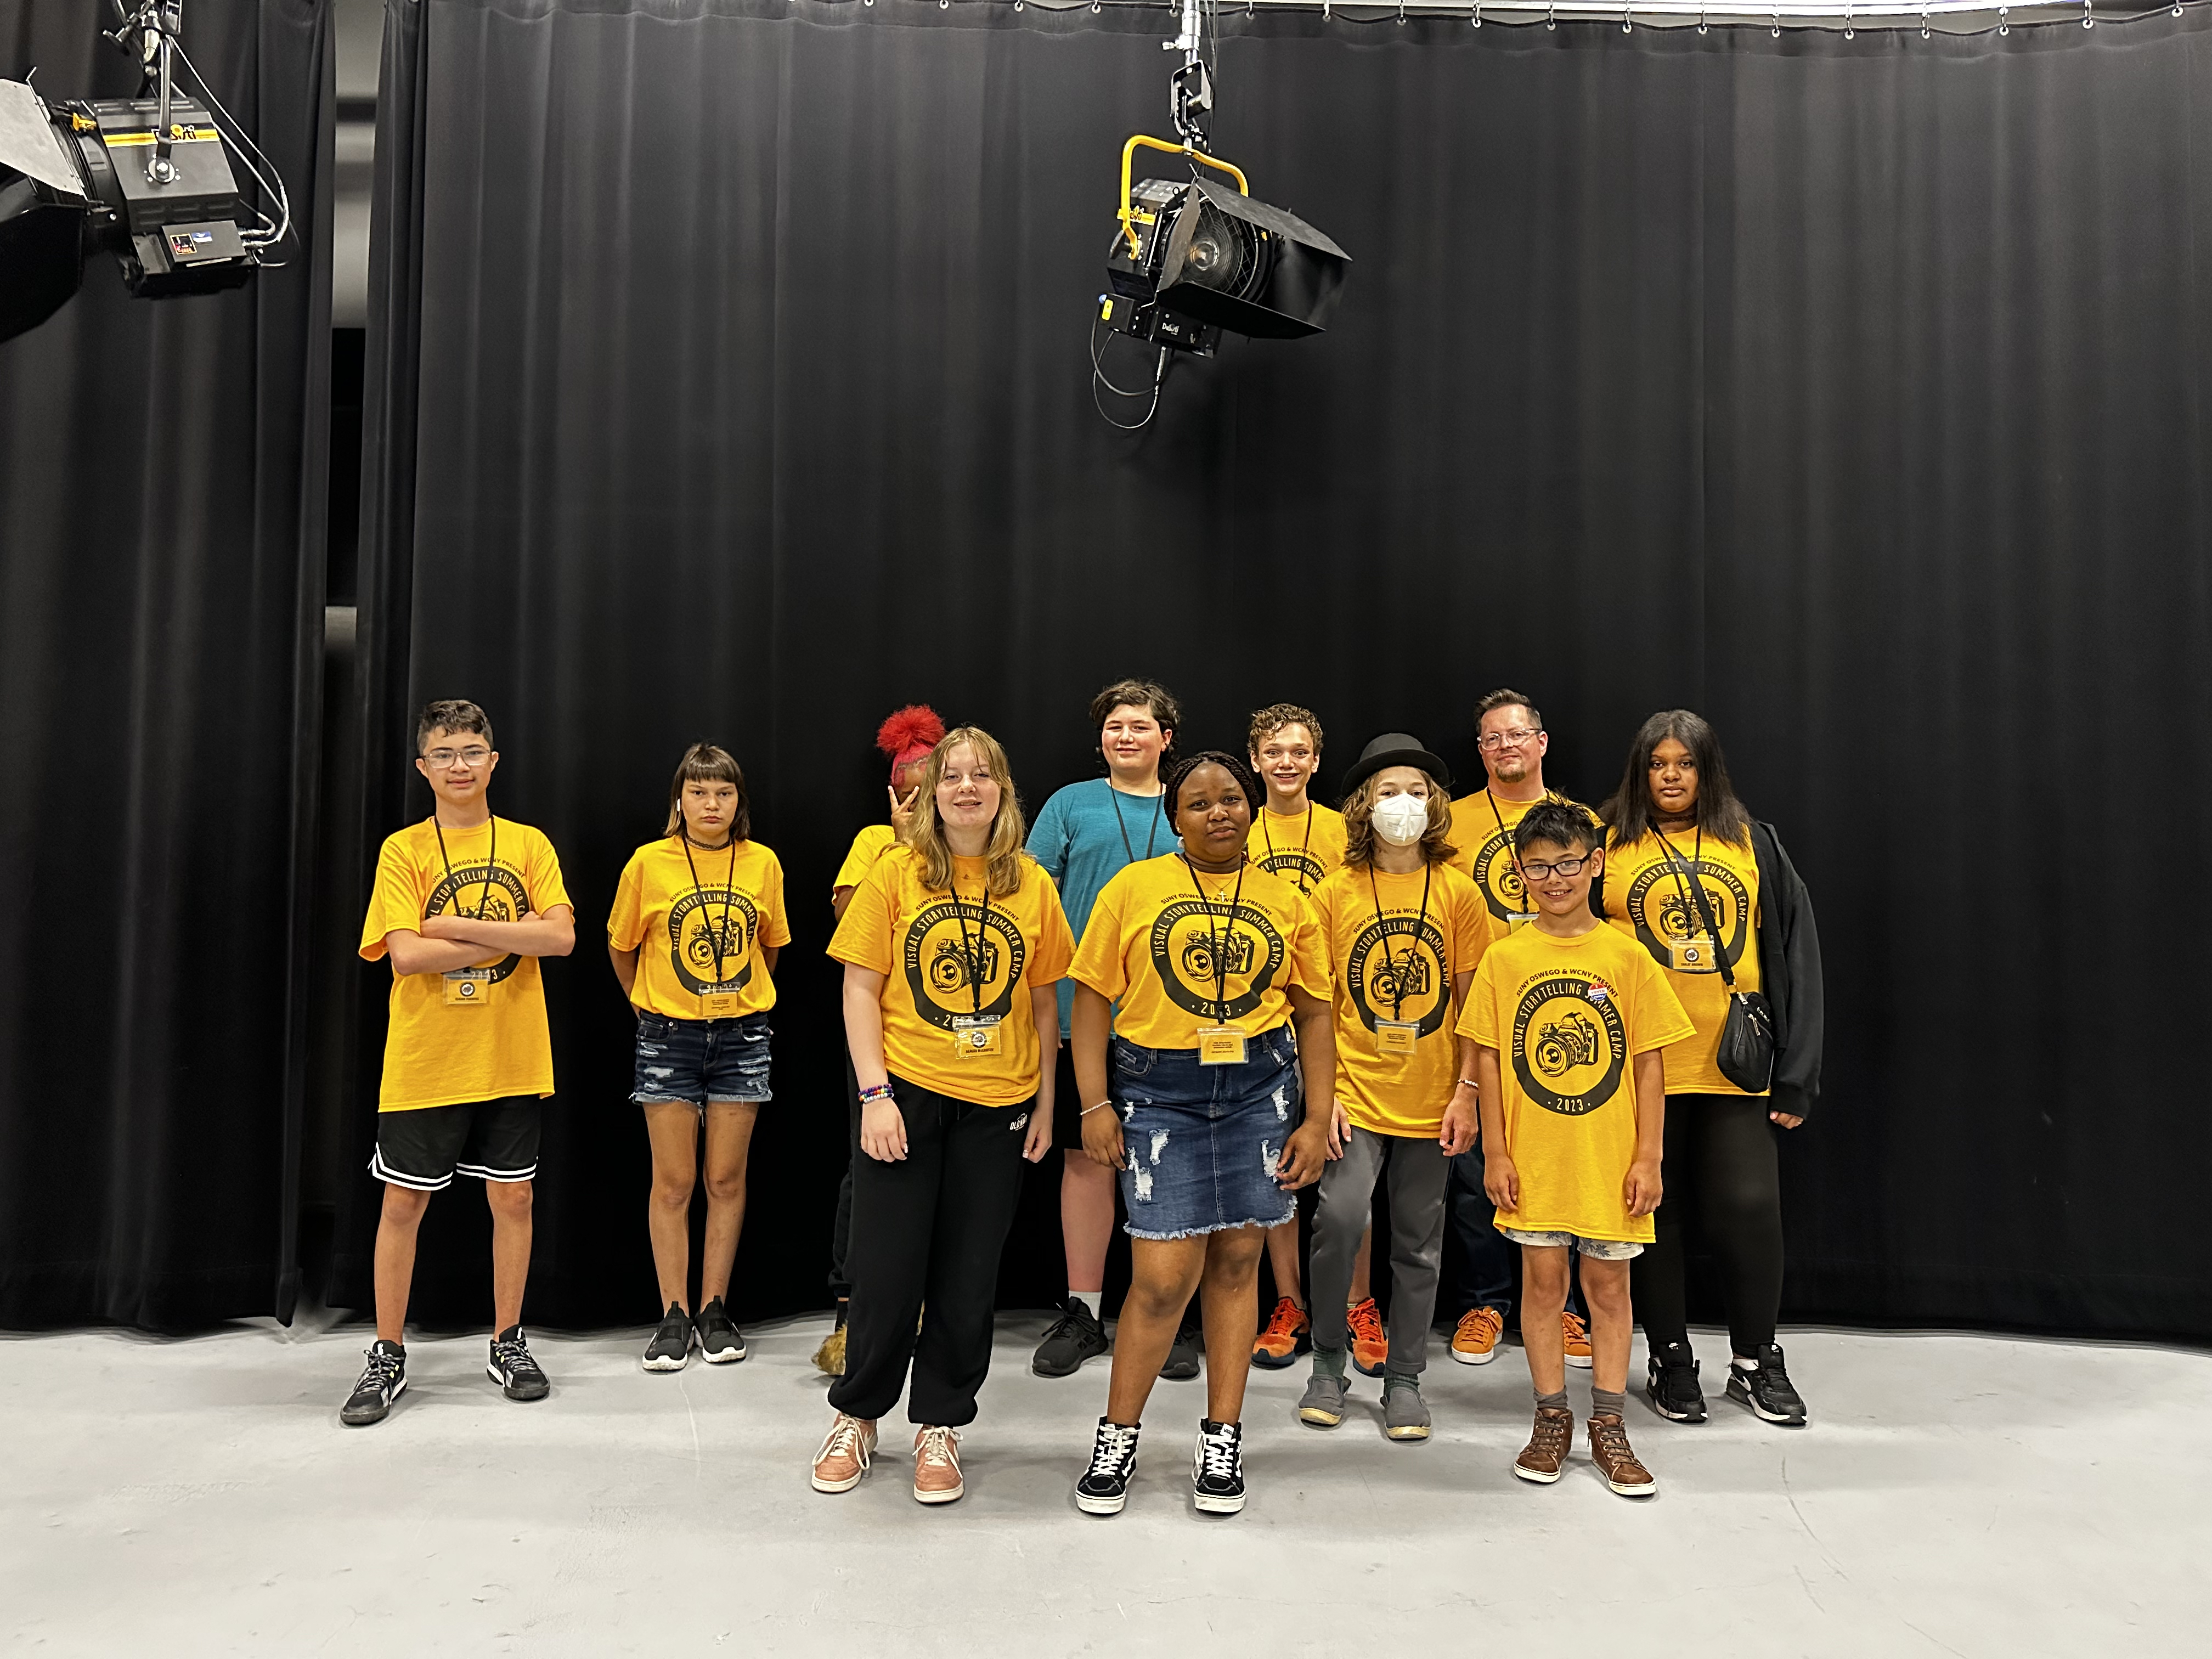 This is a photo of a group of students standing in a WCNY TV studio wearing matching yellow tshirts and smiling at the camera.